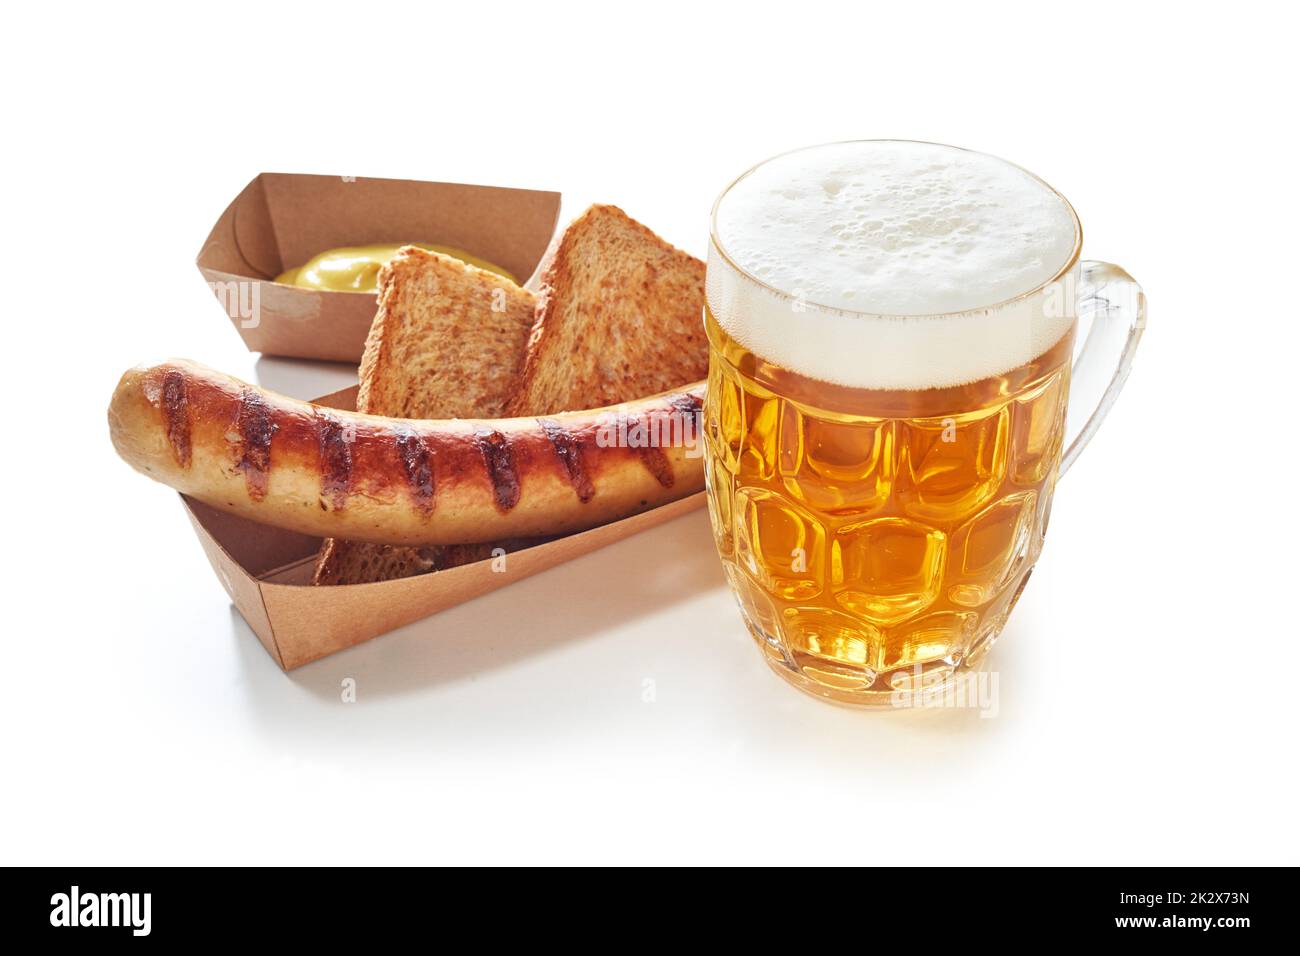 Beer and grilled sausage on table Stock Photo